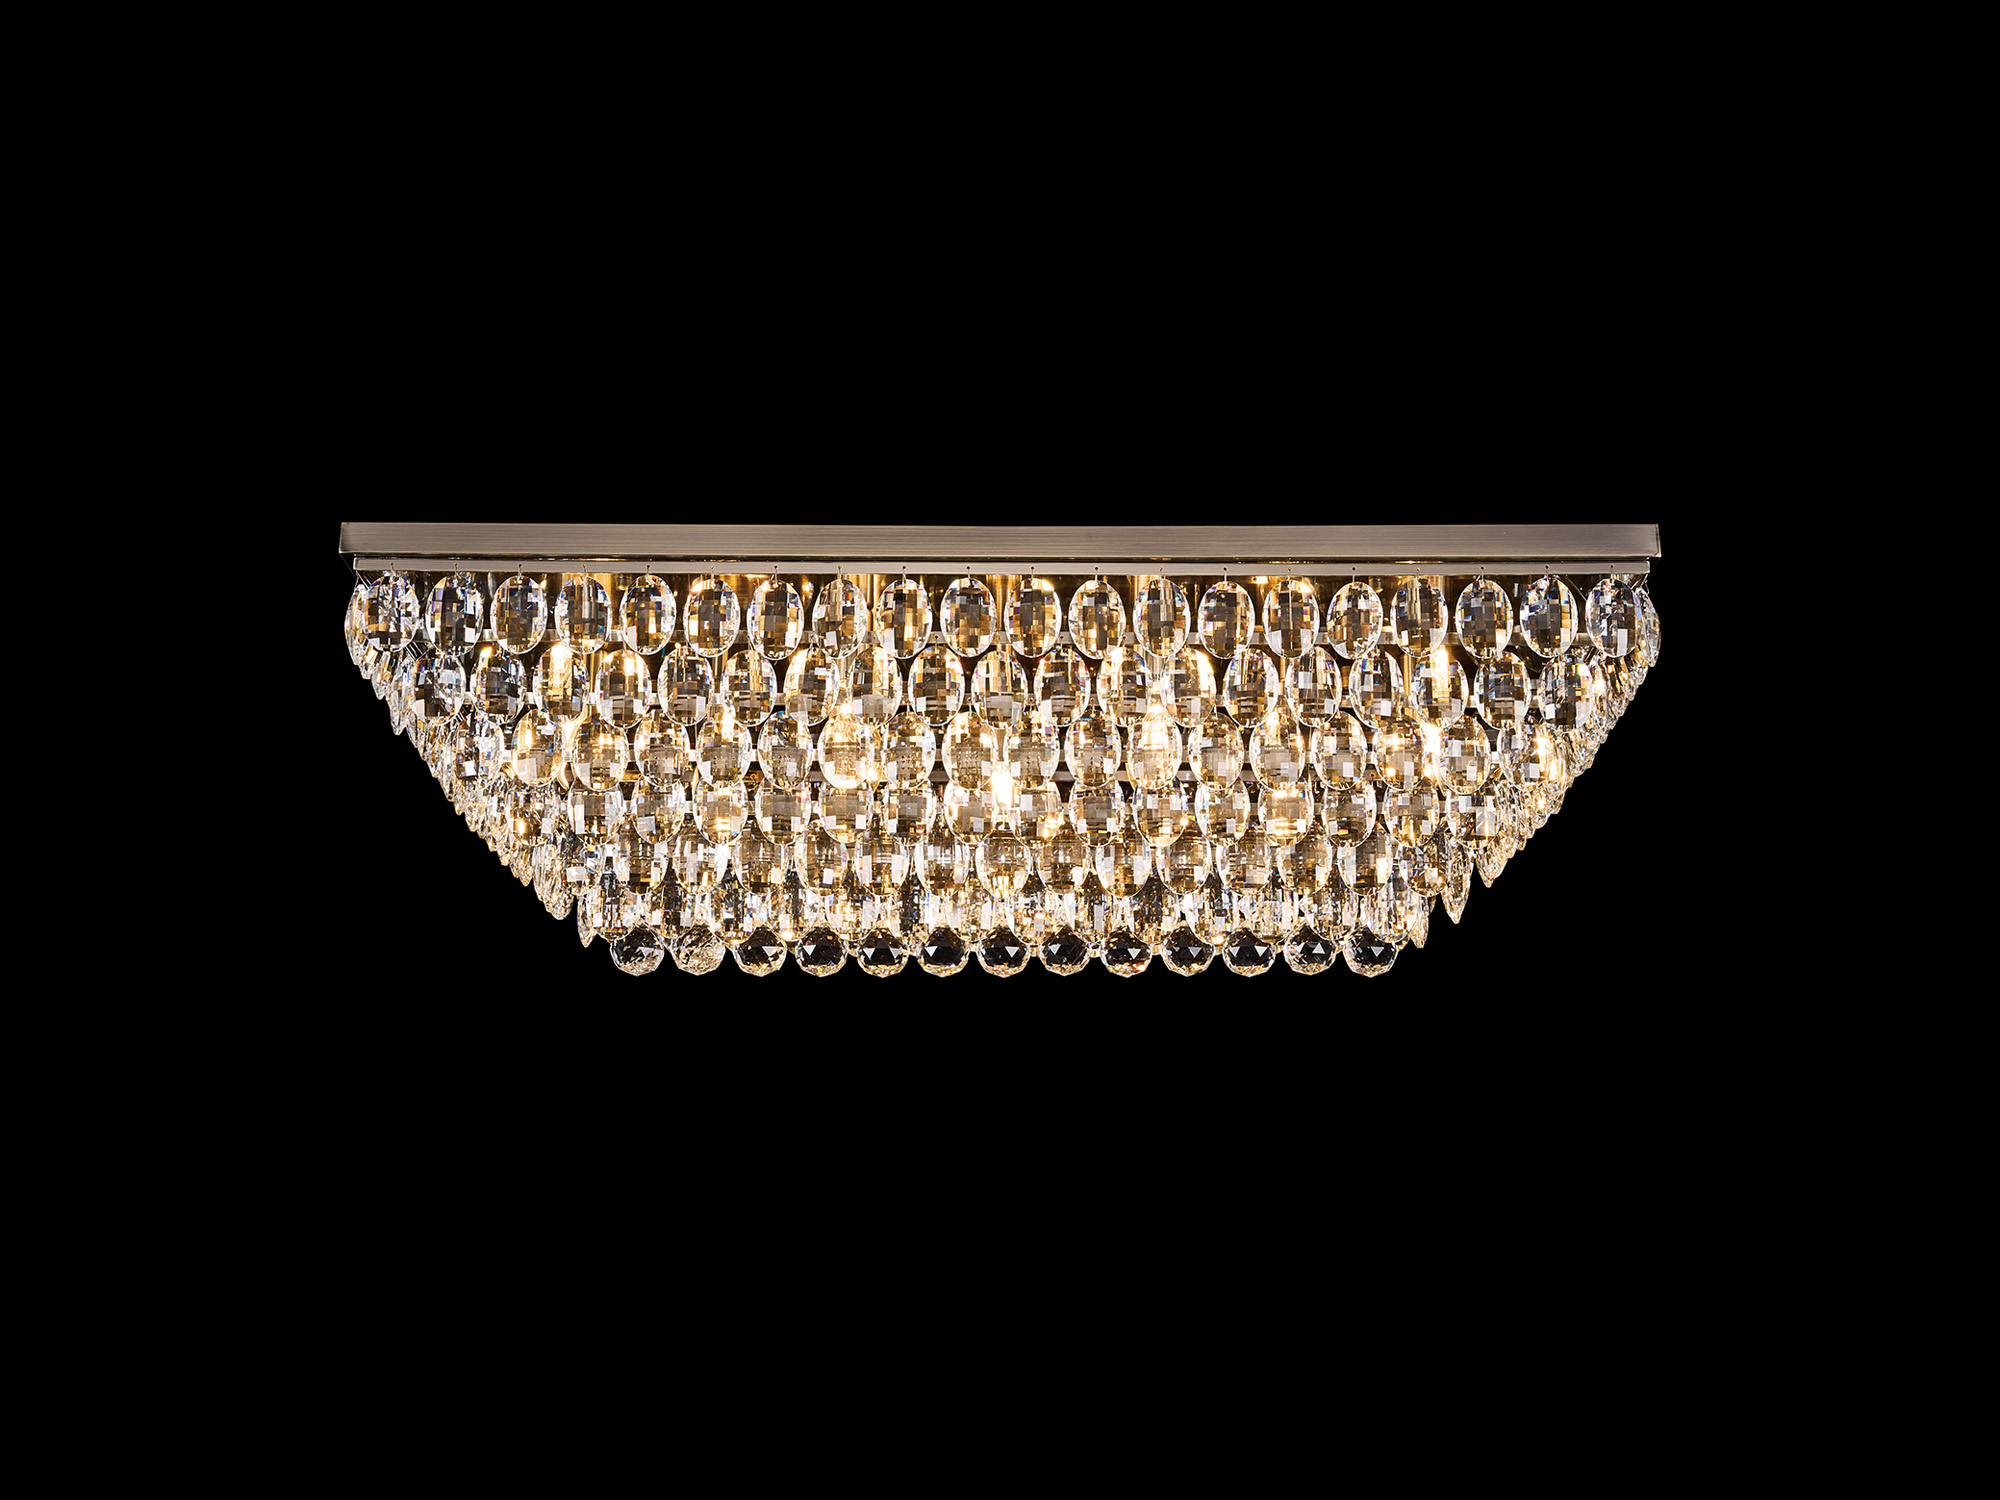 Coniston Antique Brass Crystal Ceiling Lights Diyas Linear Crystal Fittings